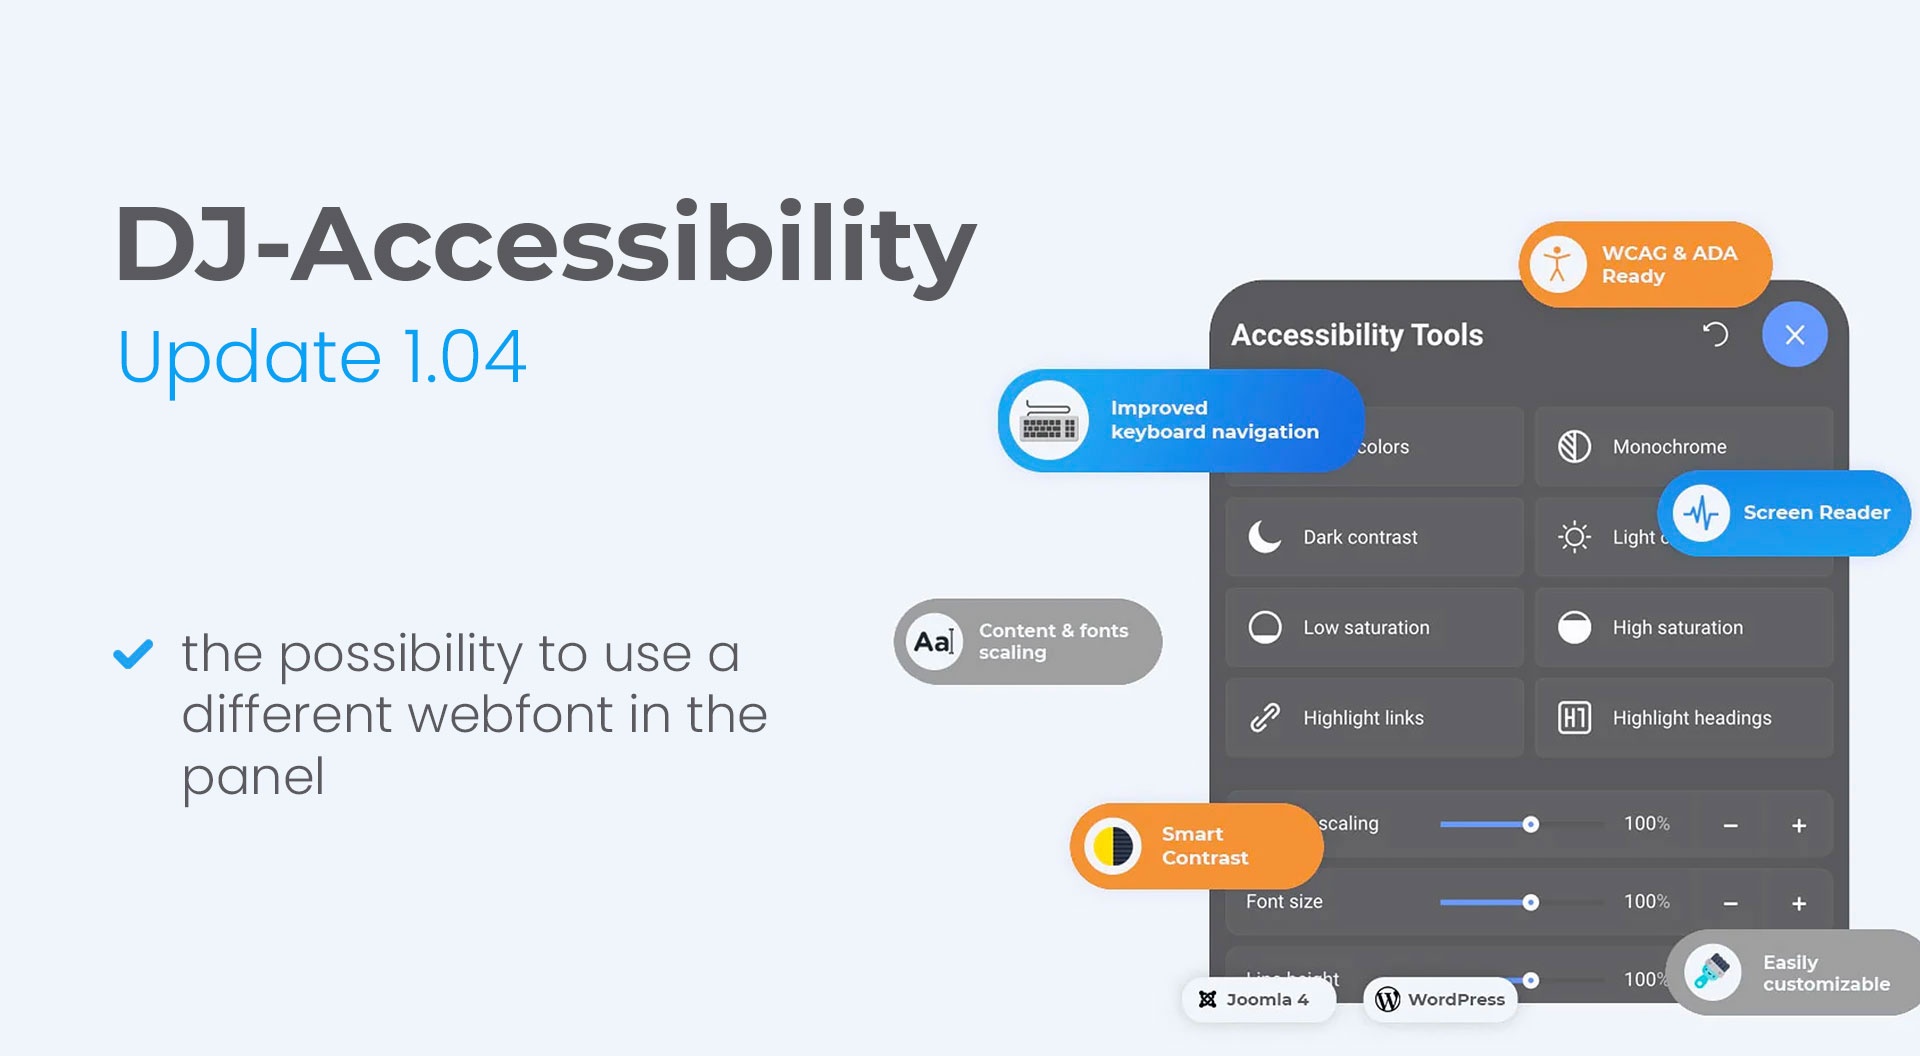 Joomla-Monster Joomla News: DJ-Accessibility with the possibility to use local or web fonts